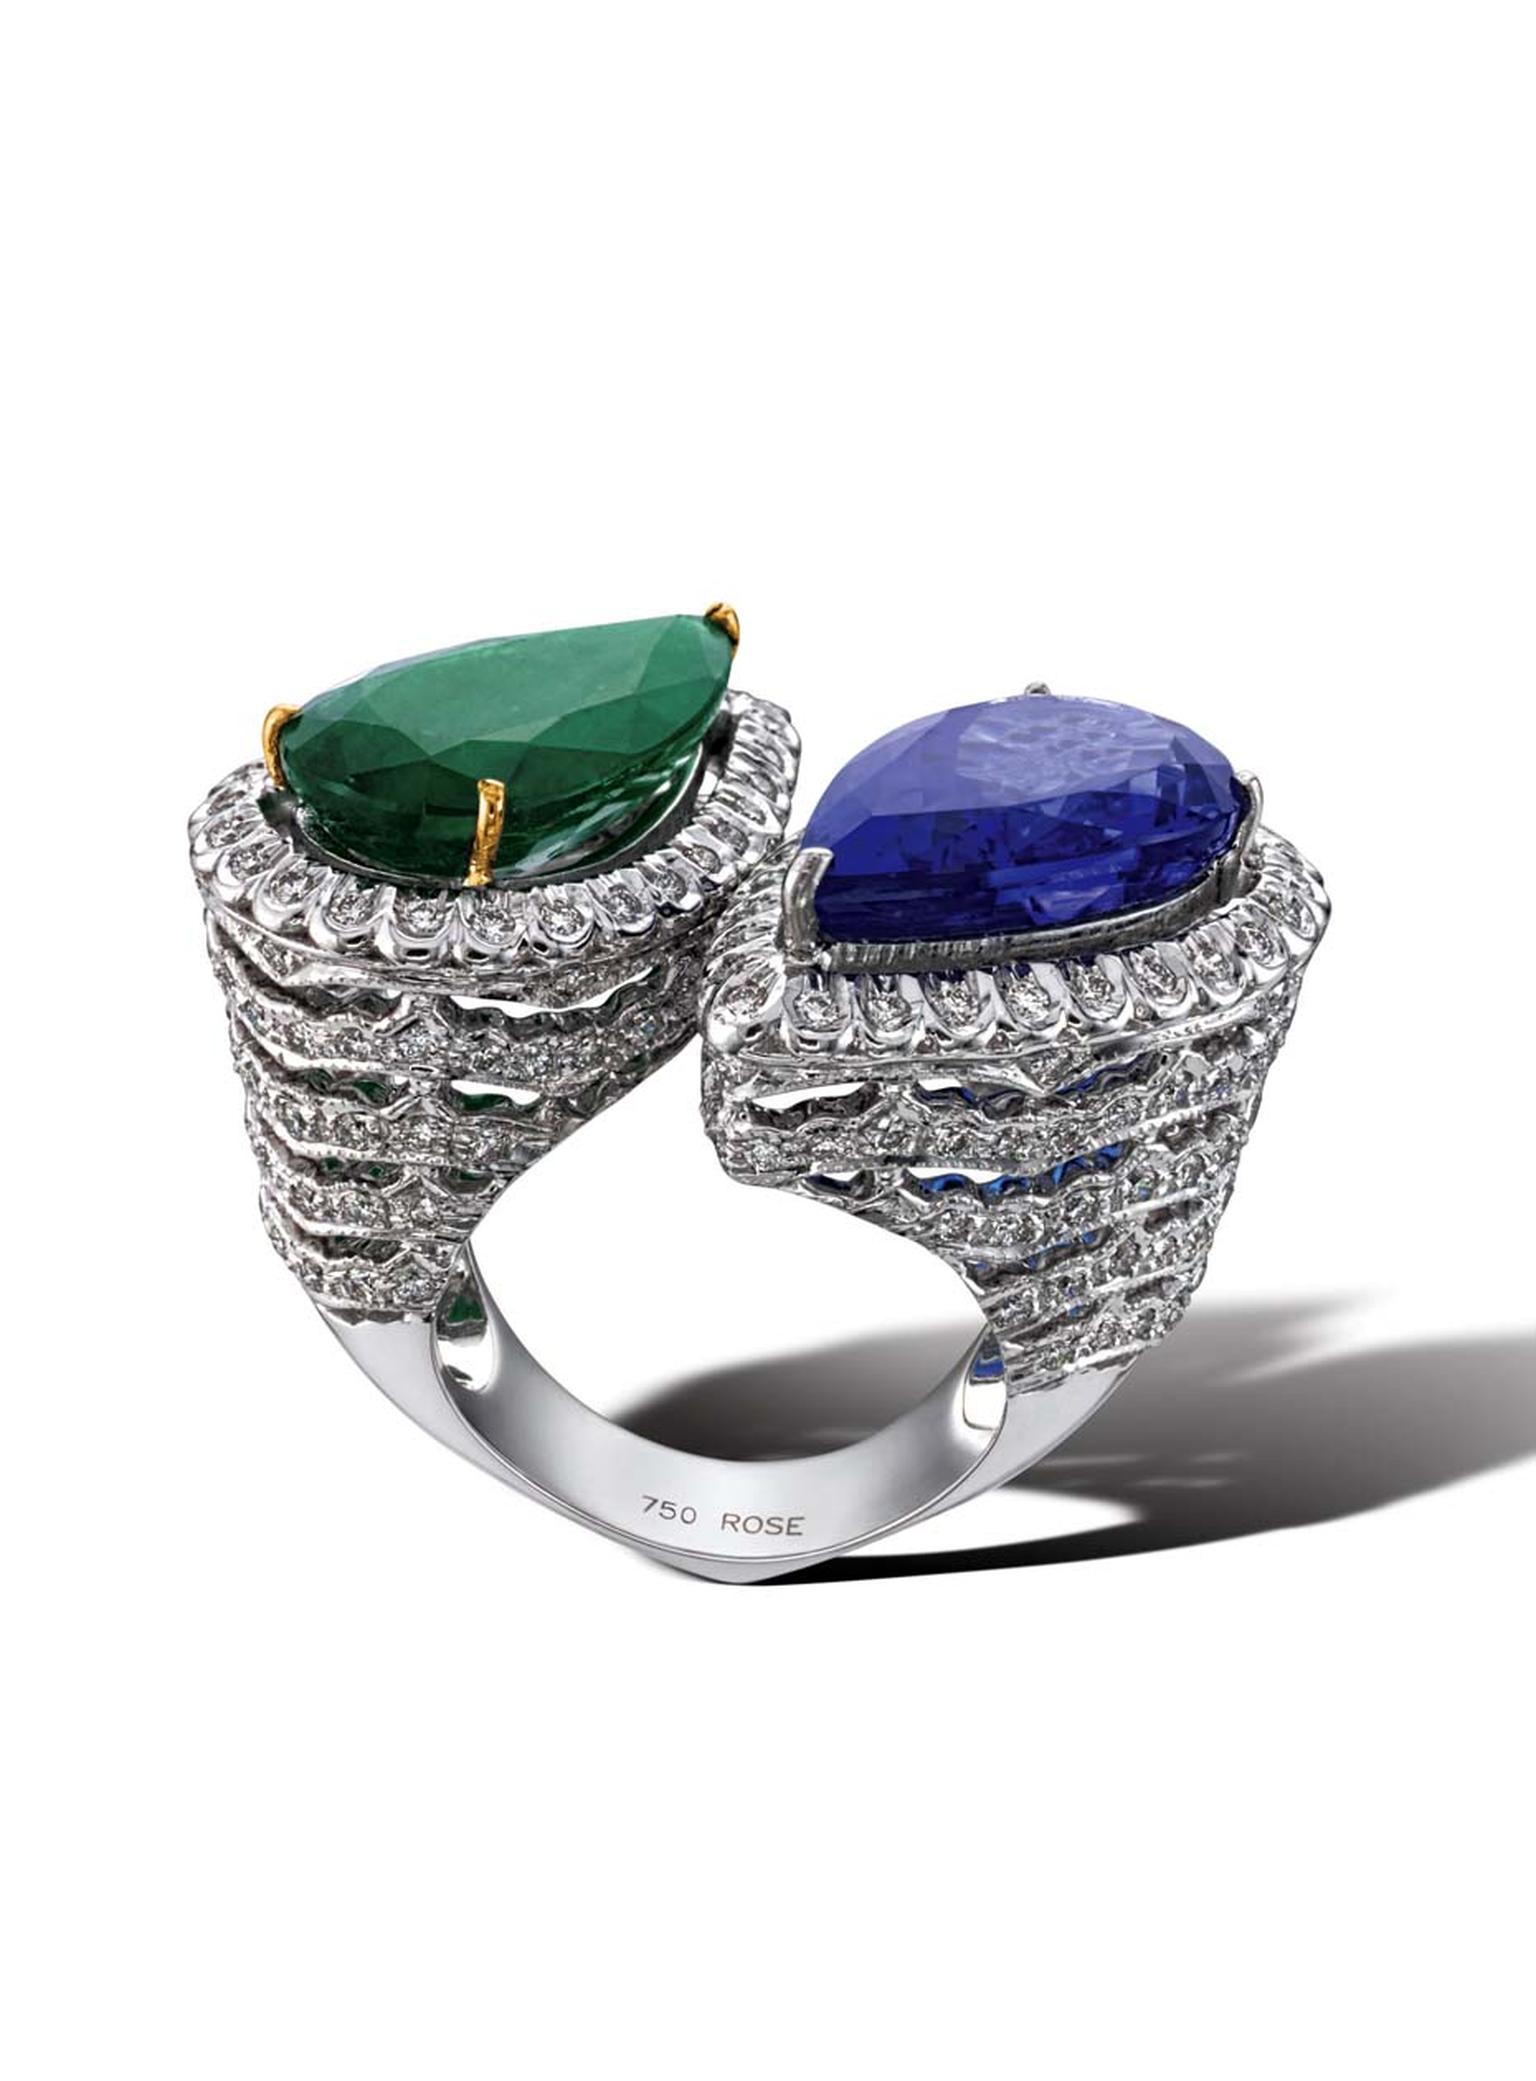 House of Rose emerald and tanzanite ring with diamonds.